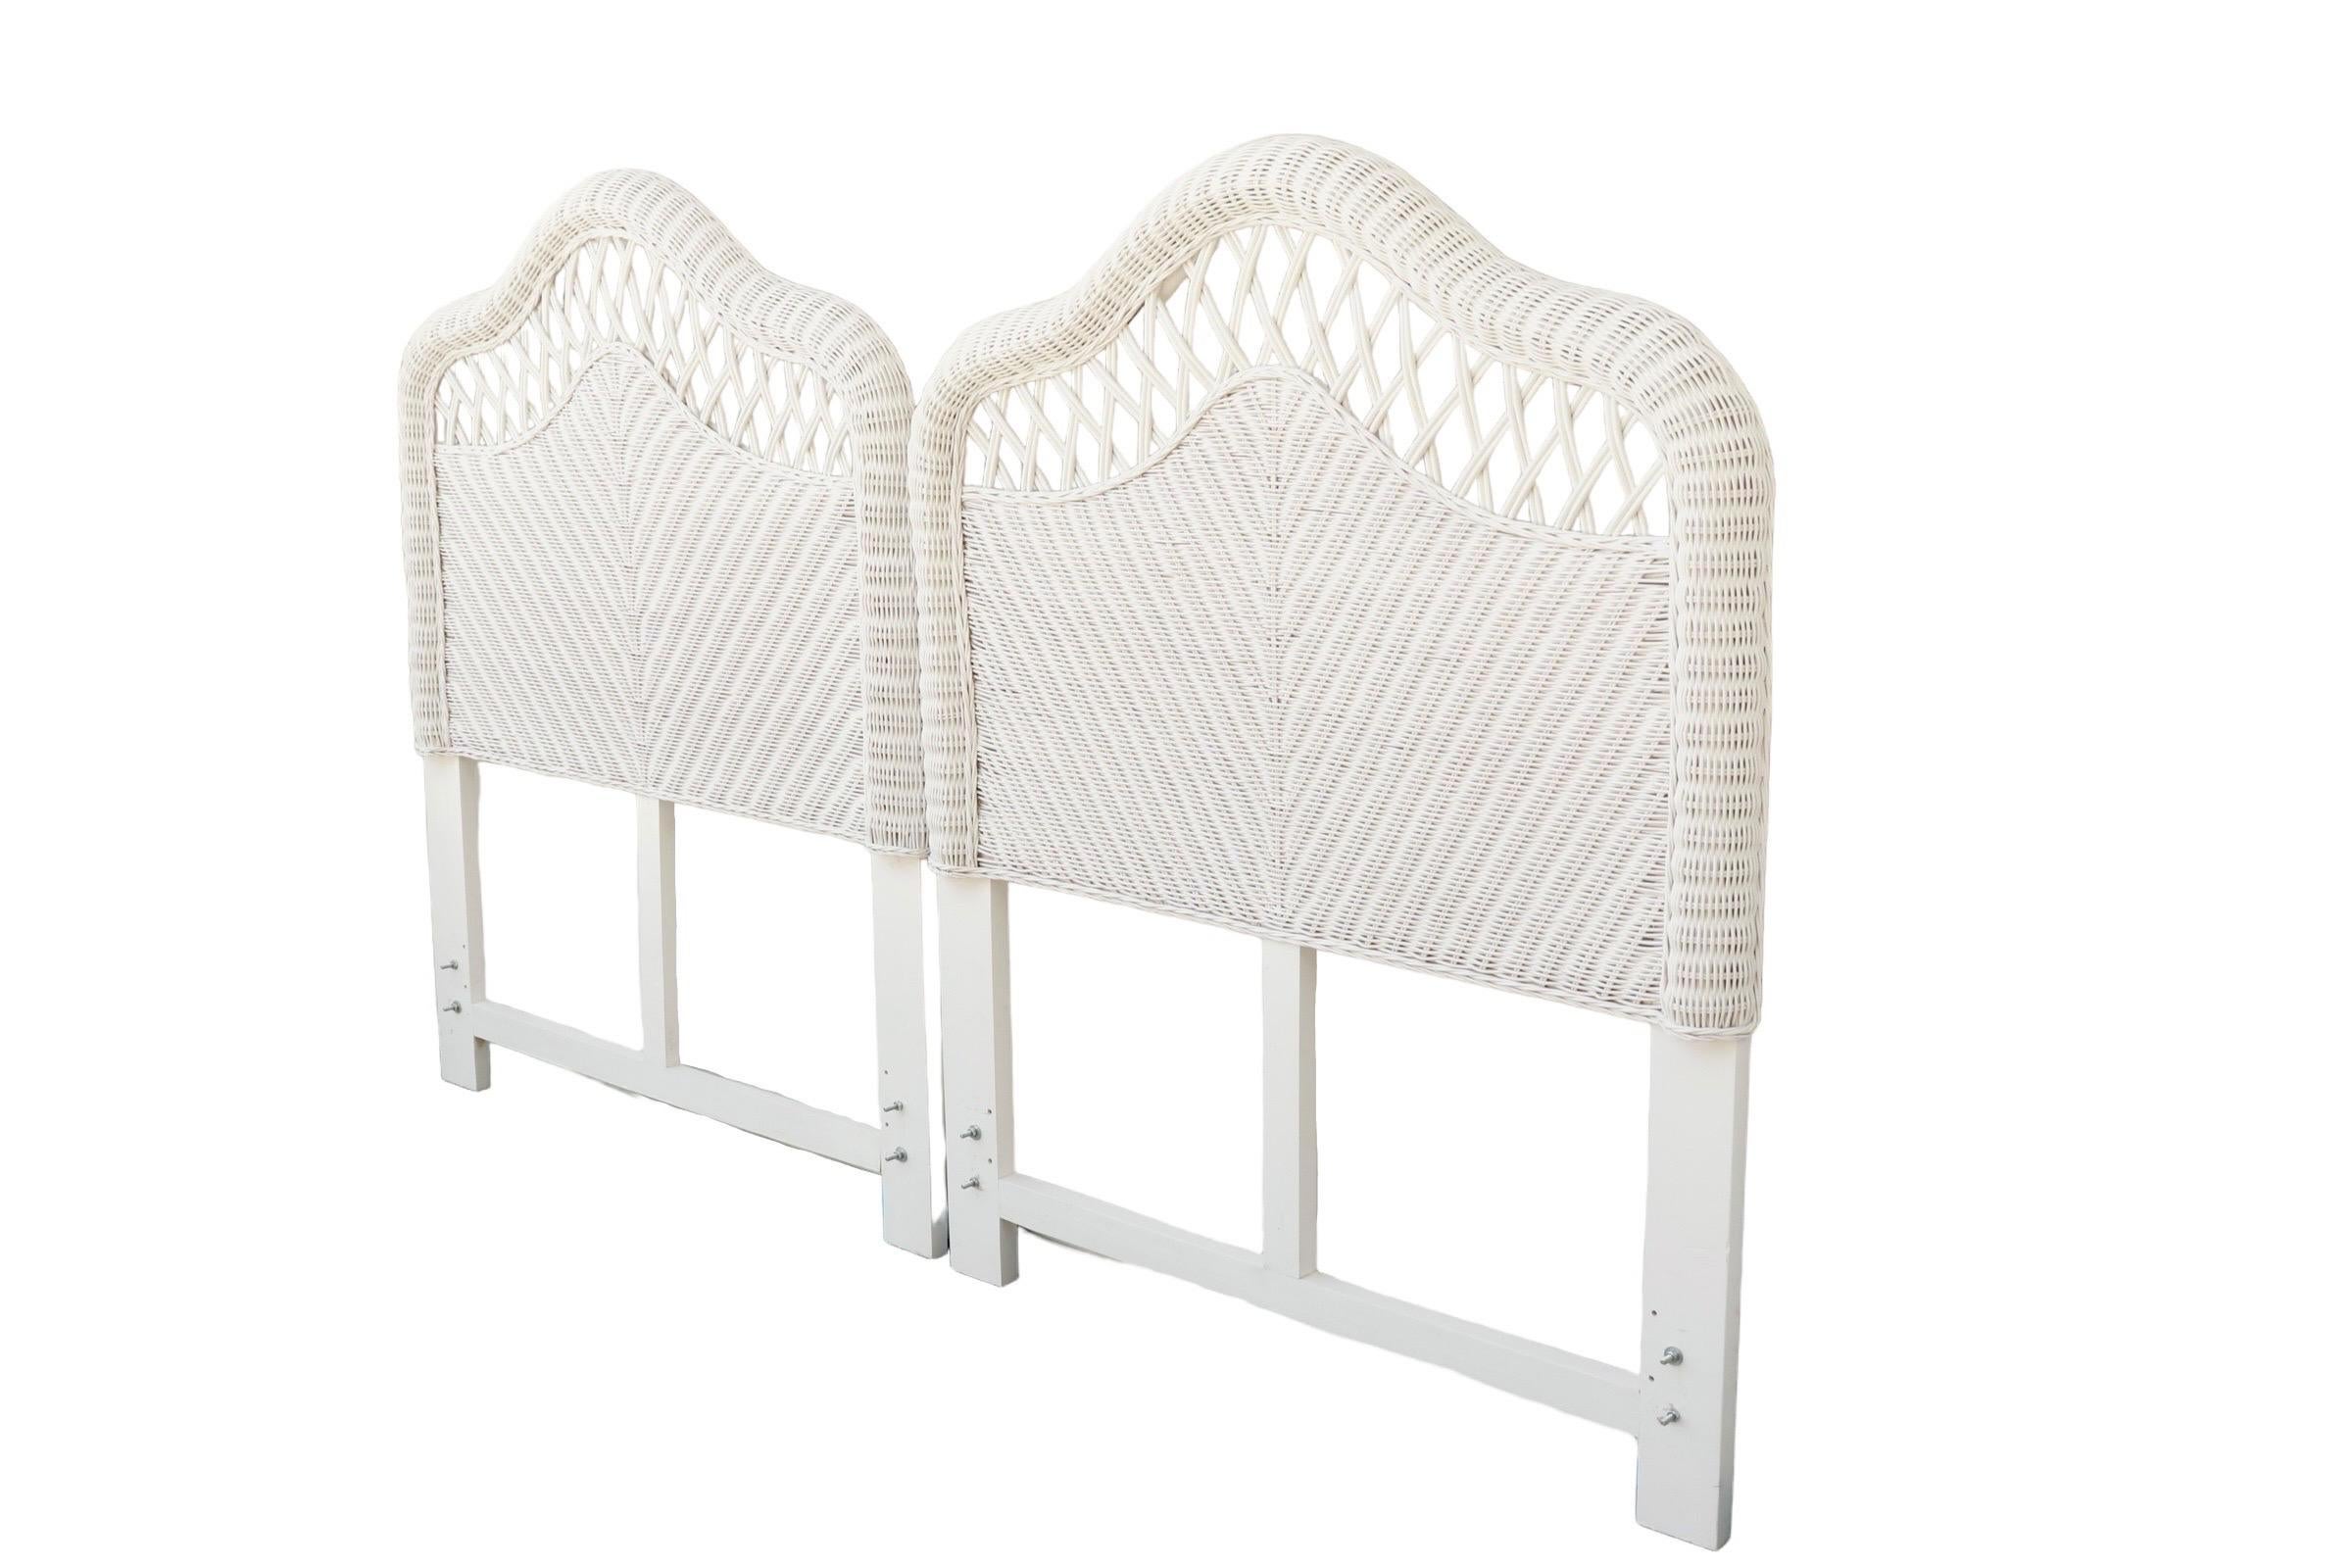 A pair of white Heywood Wakefield style twin size wicker headboards. Bentwood bamboo and wooden frames support curved woven rattan in a camel back shape. Decorated with an open weave panel above a chevron woven back. Finished with a twist braid trim